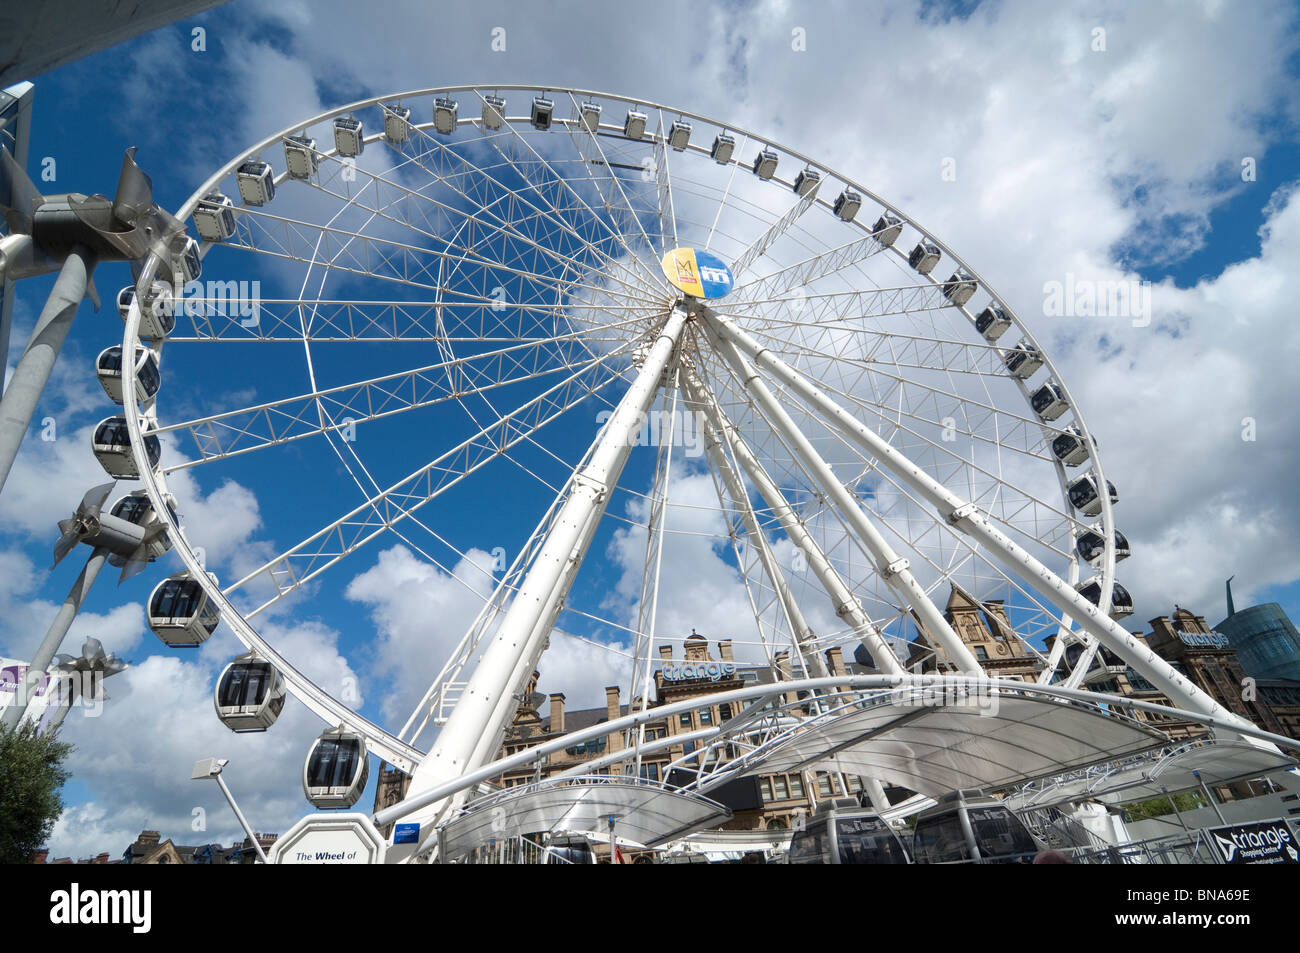 the Wheel of Manchester for the bigger picture Stock Photo